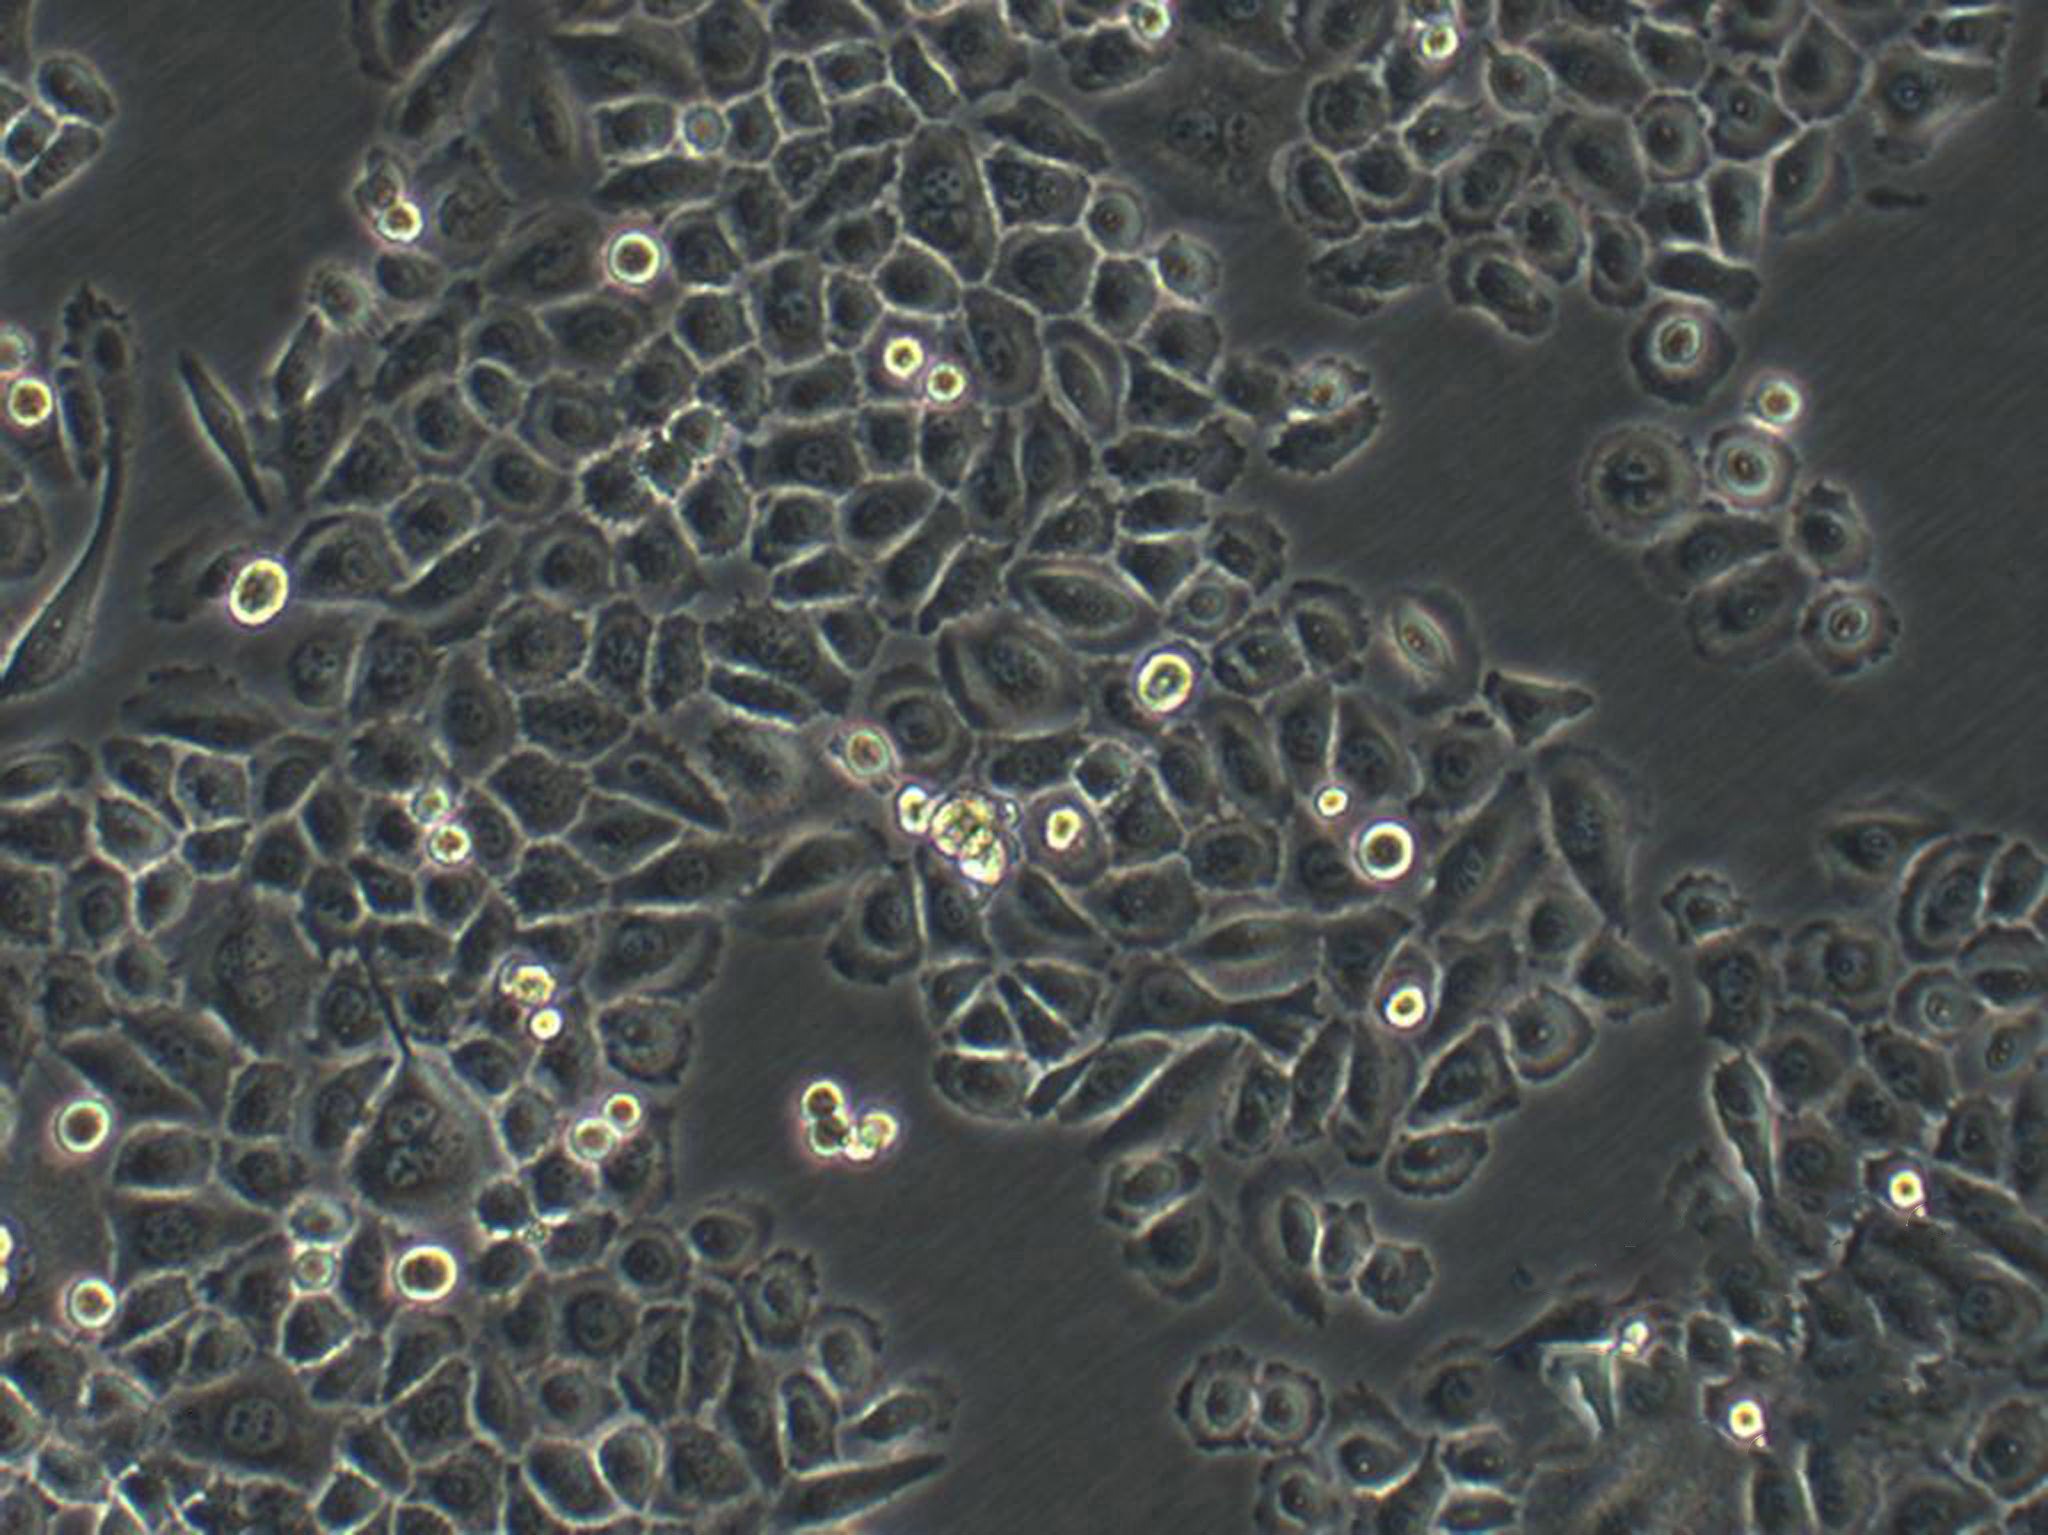 RT4-D6P2T cell line大鼠神经许旺细胞系,RT4-D6P2T cell line